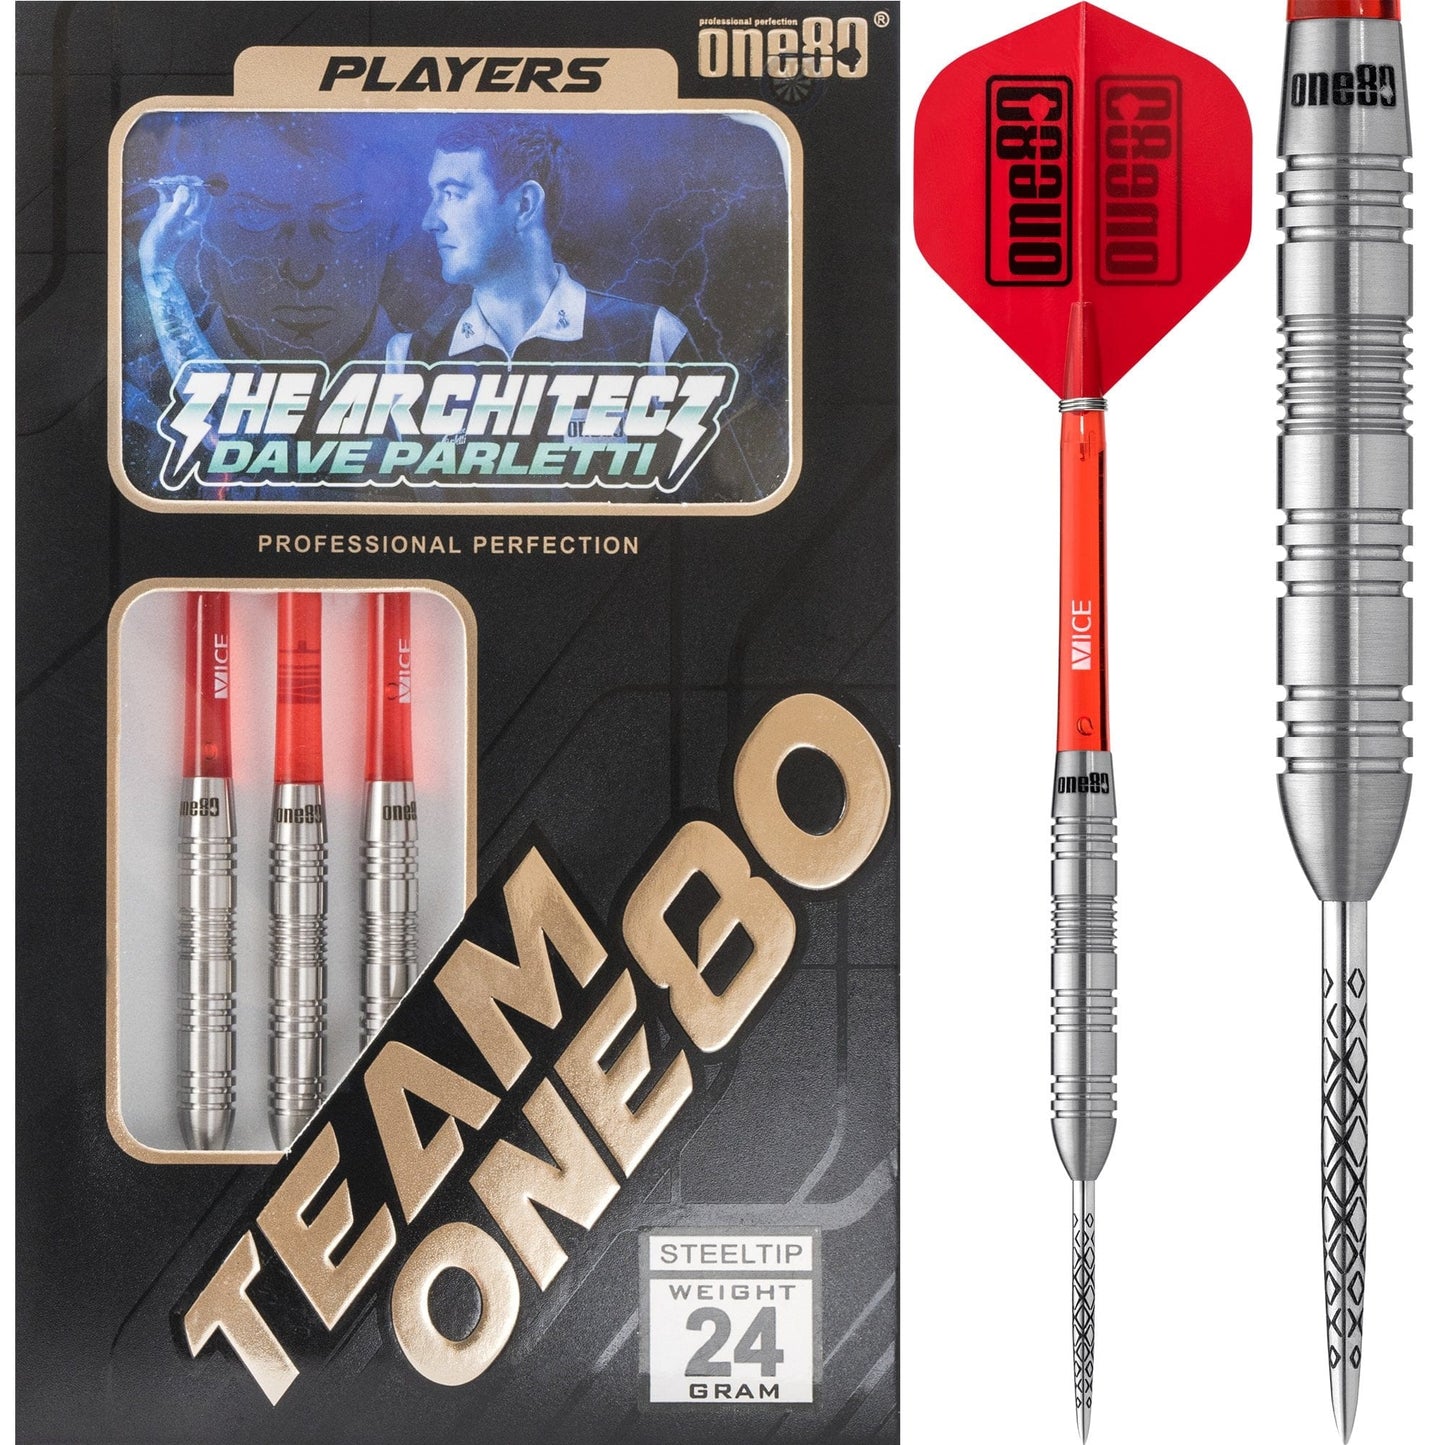 One80 Dave Parletti Darts - Steel Tip - The Architect - 24g 24gPERS